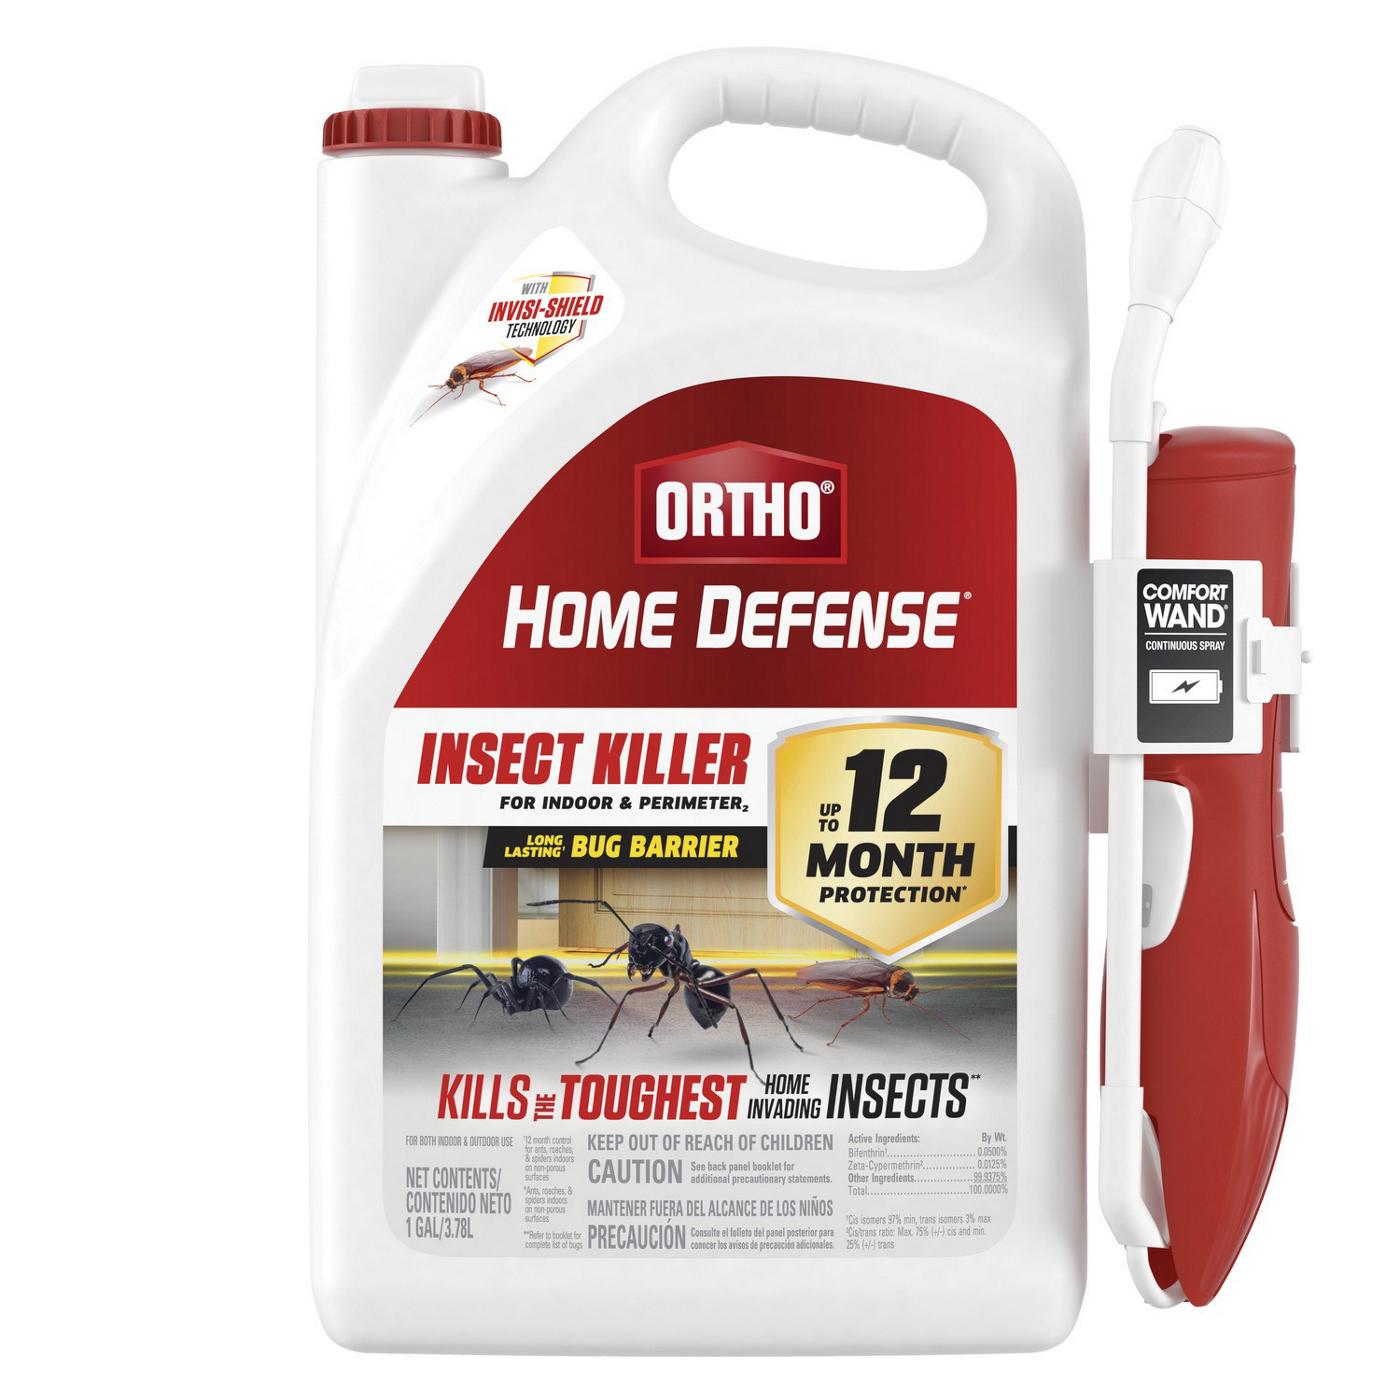 Ortho Home Defense Insect Killer; image 1 of 3